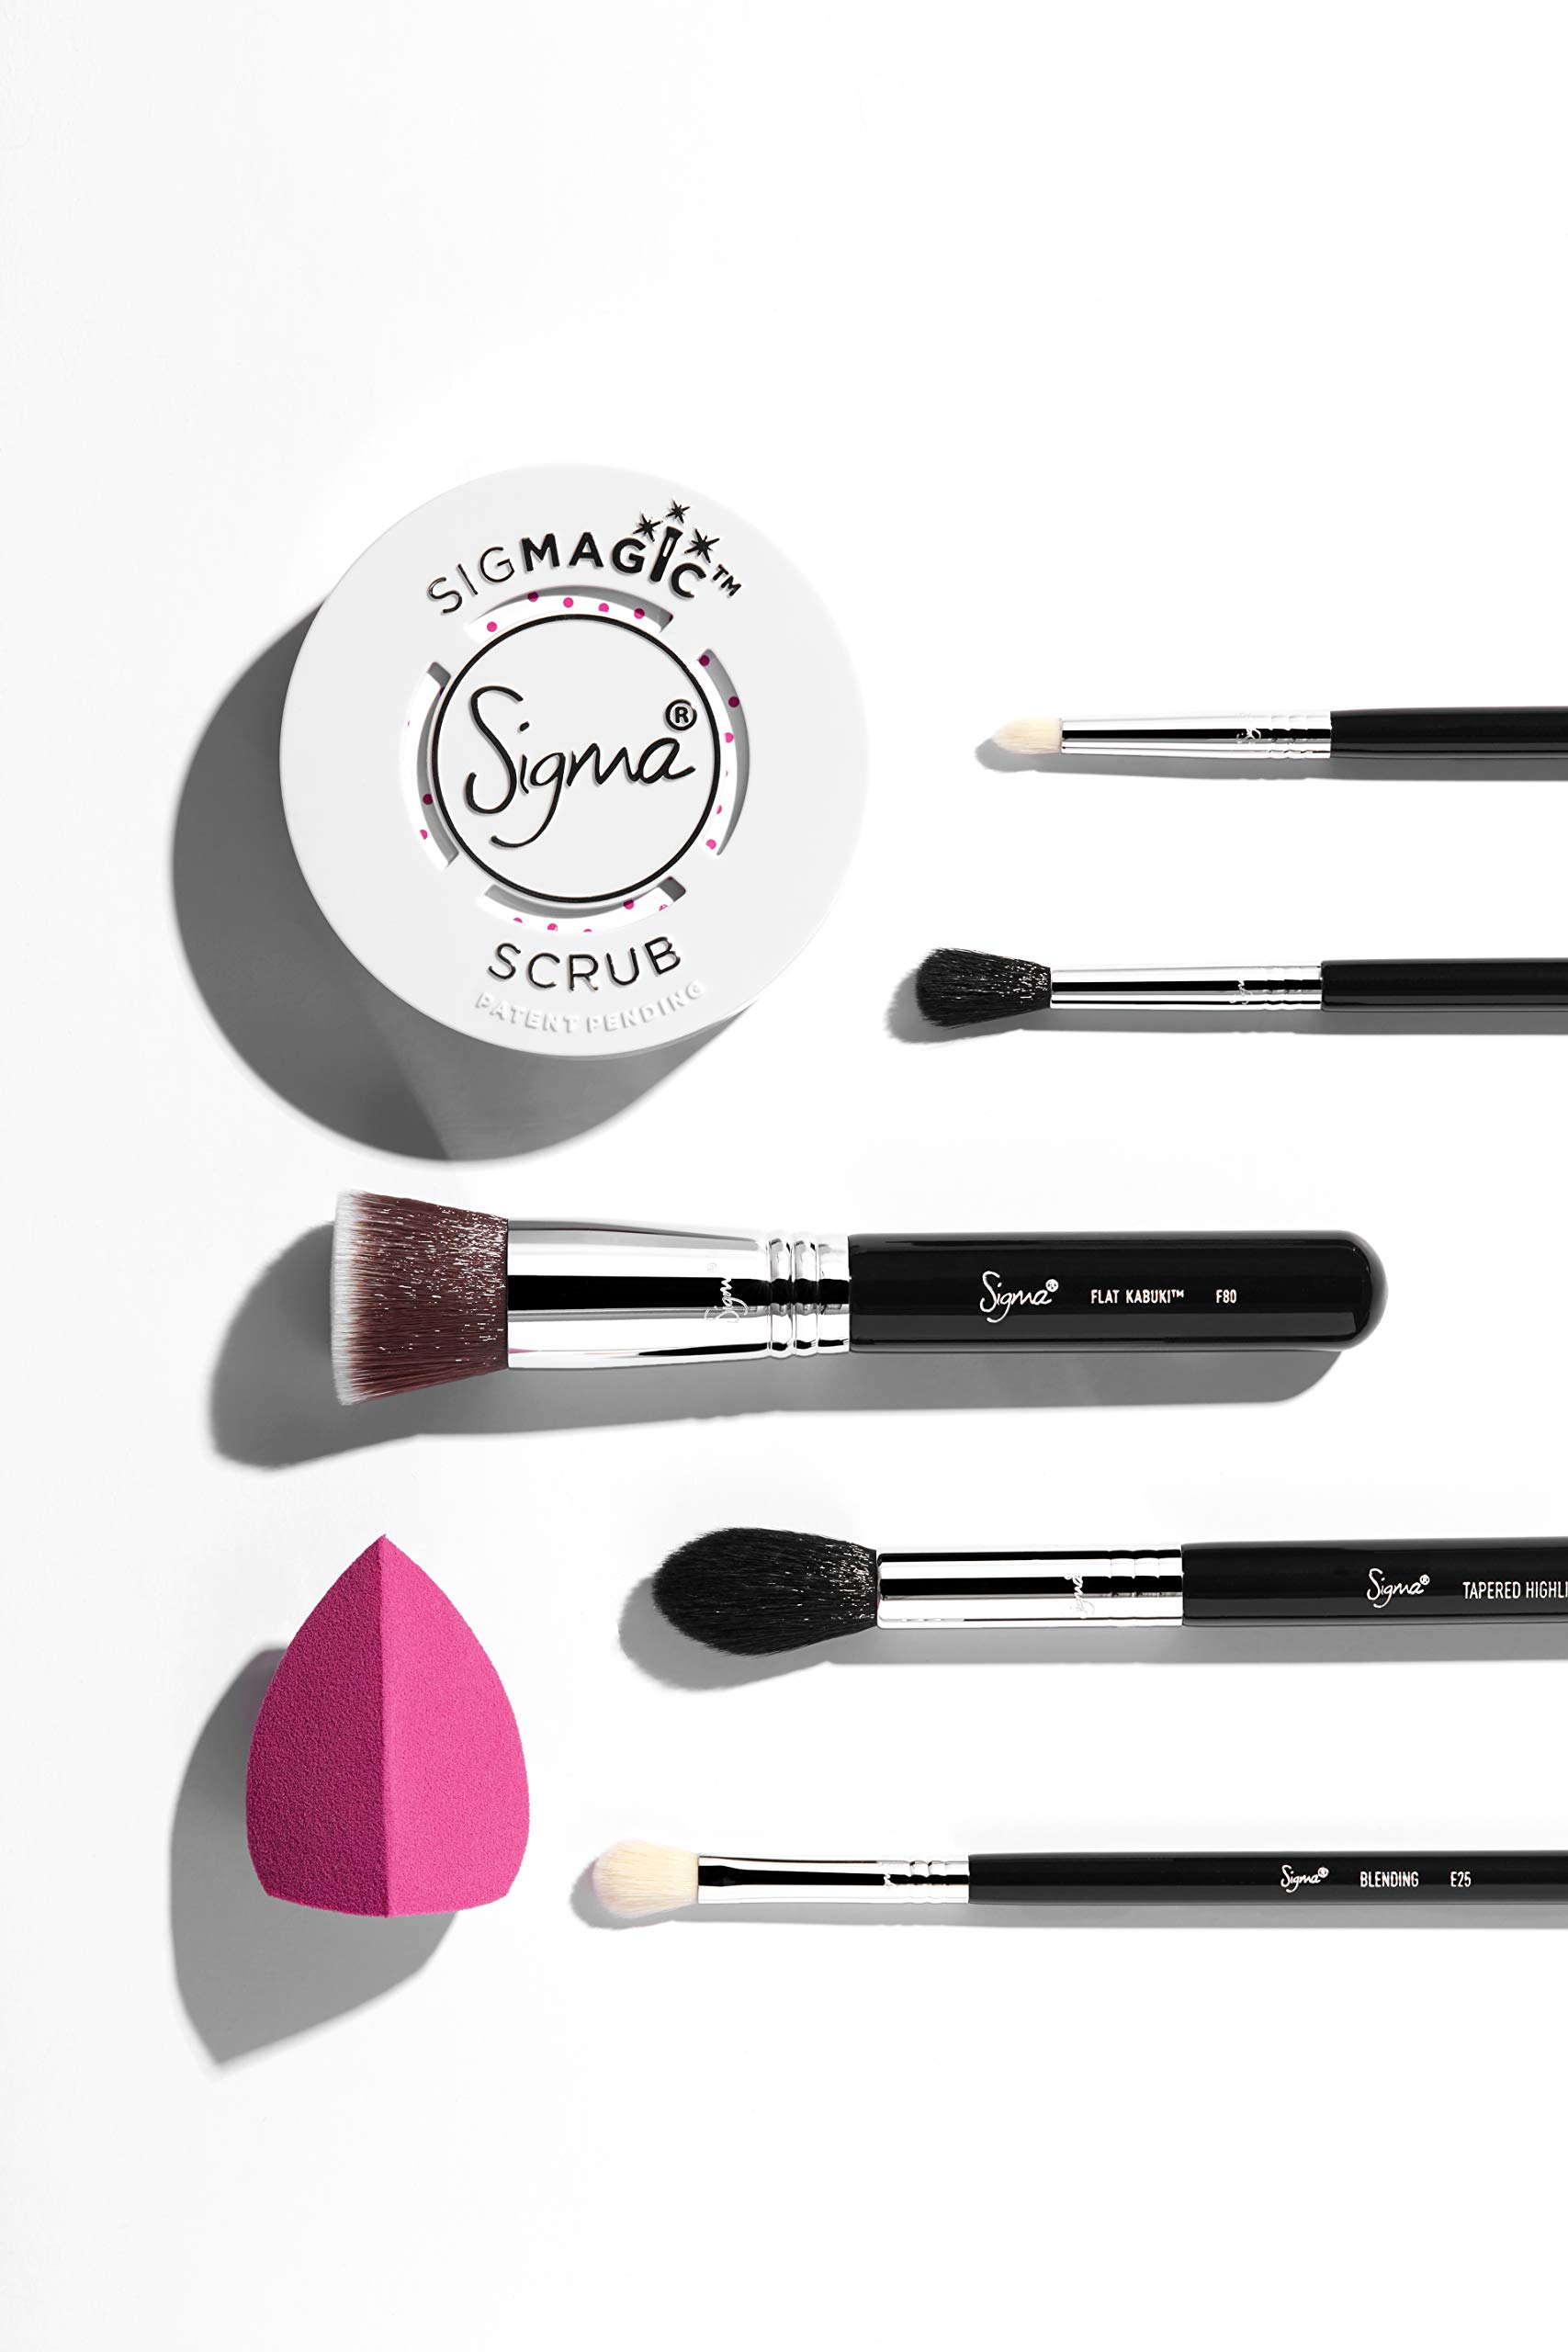 Sigma Most-Wanted Brush Set - Includes 5 of our Favorite Brushes, Perfect for Face & Eye Makeup